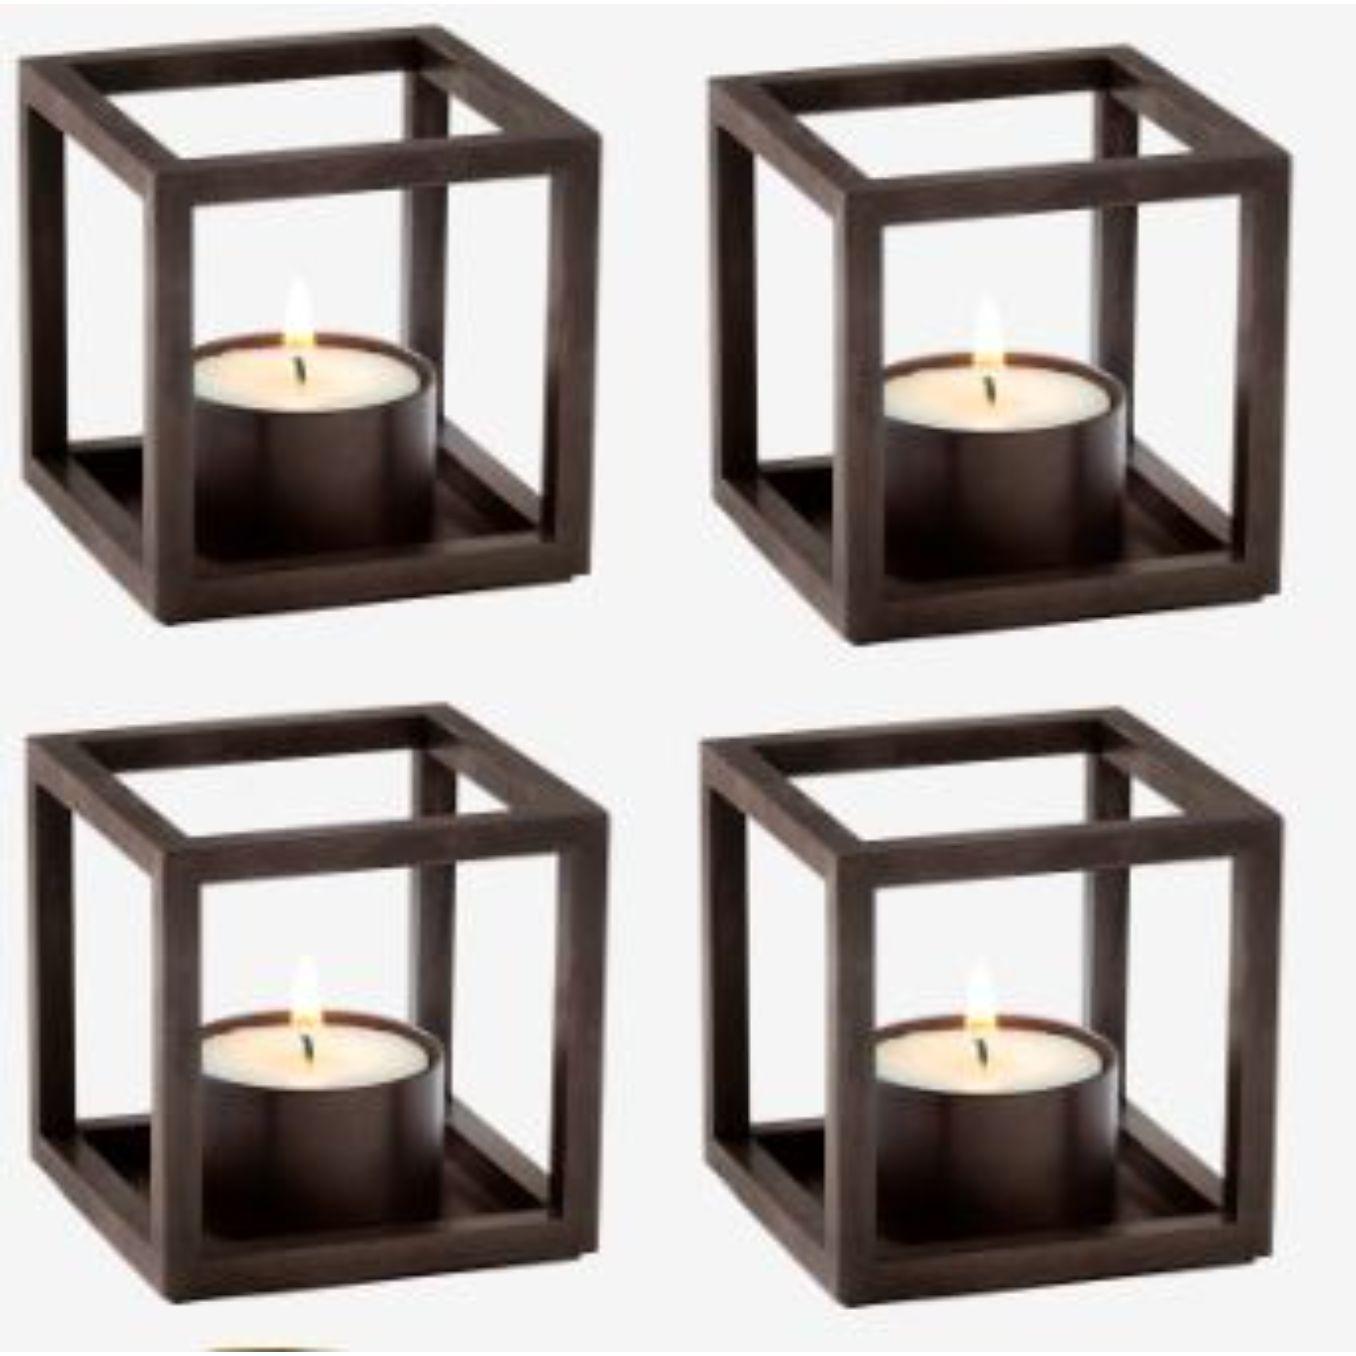 Set Of 4 Burnished Copper Kubus T Candle Holders by Lassen
Dimensions: D 7 x W 7 x H 7 cm 
Materials: Metal 
Also available in different dimensions and colors. 
Weight: 0.40 Kg

The tealight, Kubus T, is added to the Kubus collection in 2018,